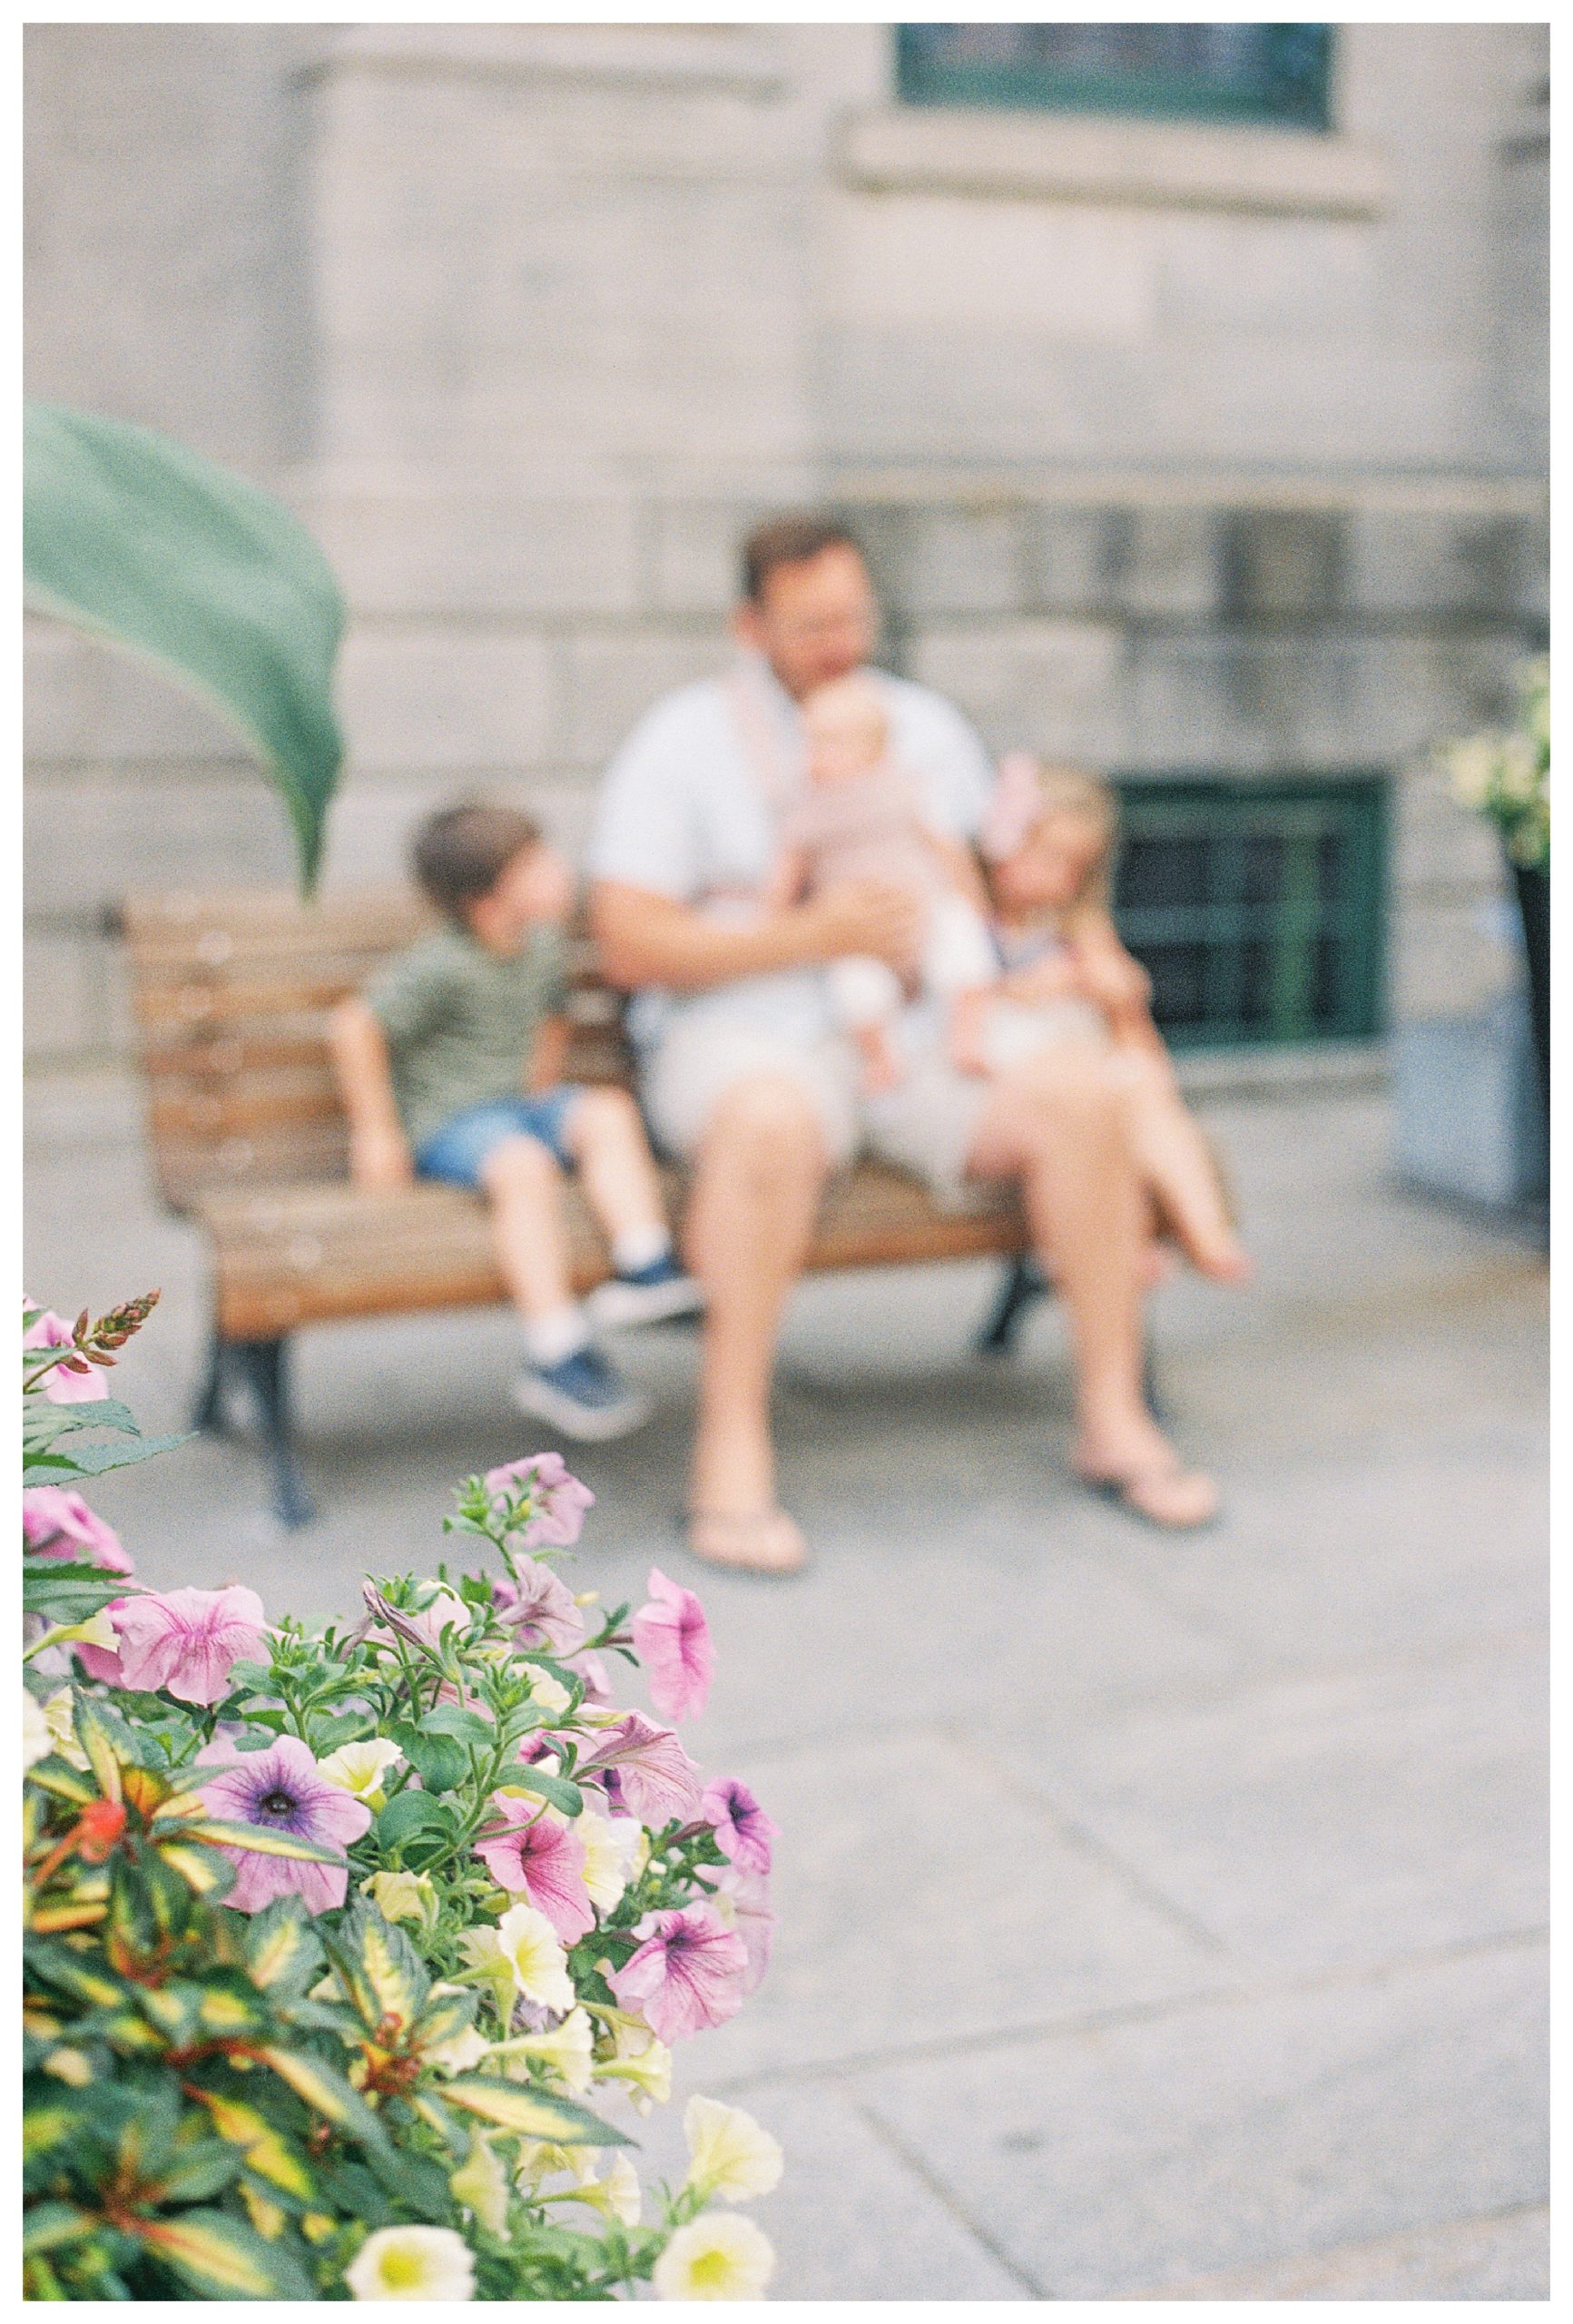 Blurry image of father sitting on bench with three children in Old Montreal.